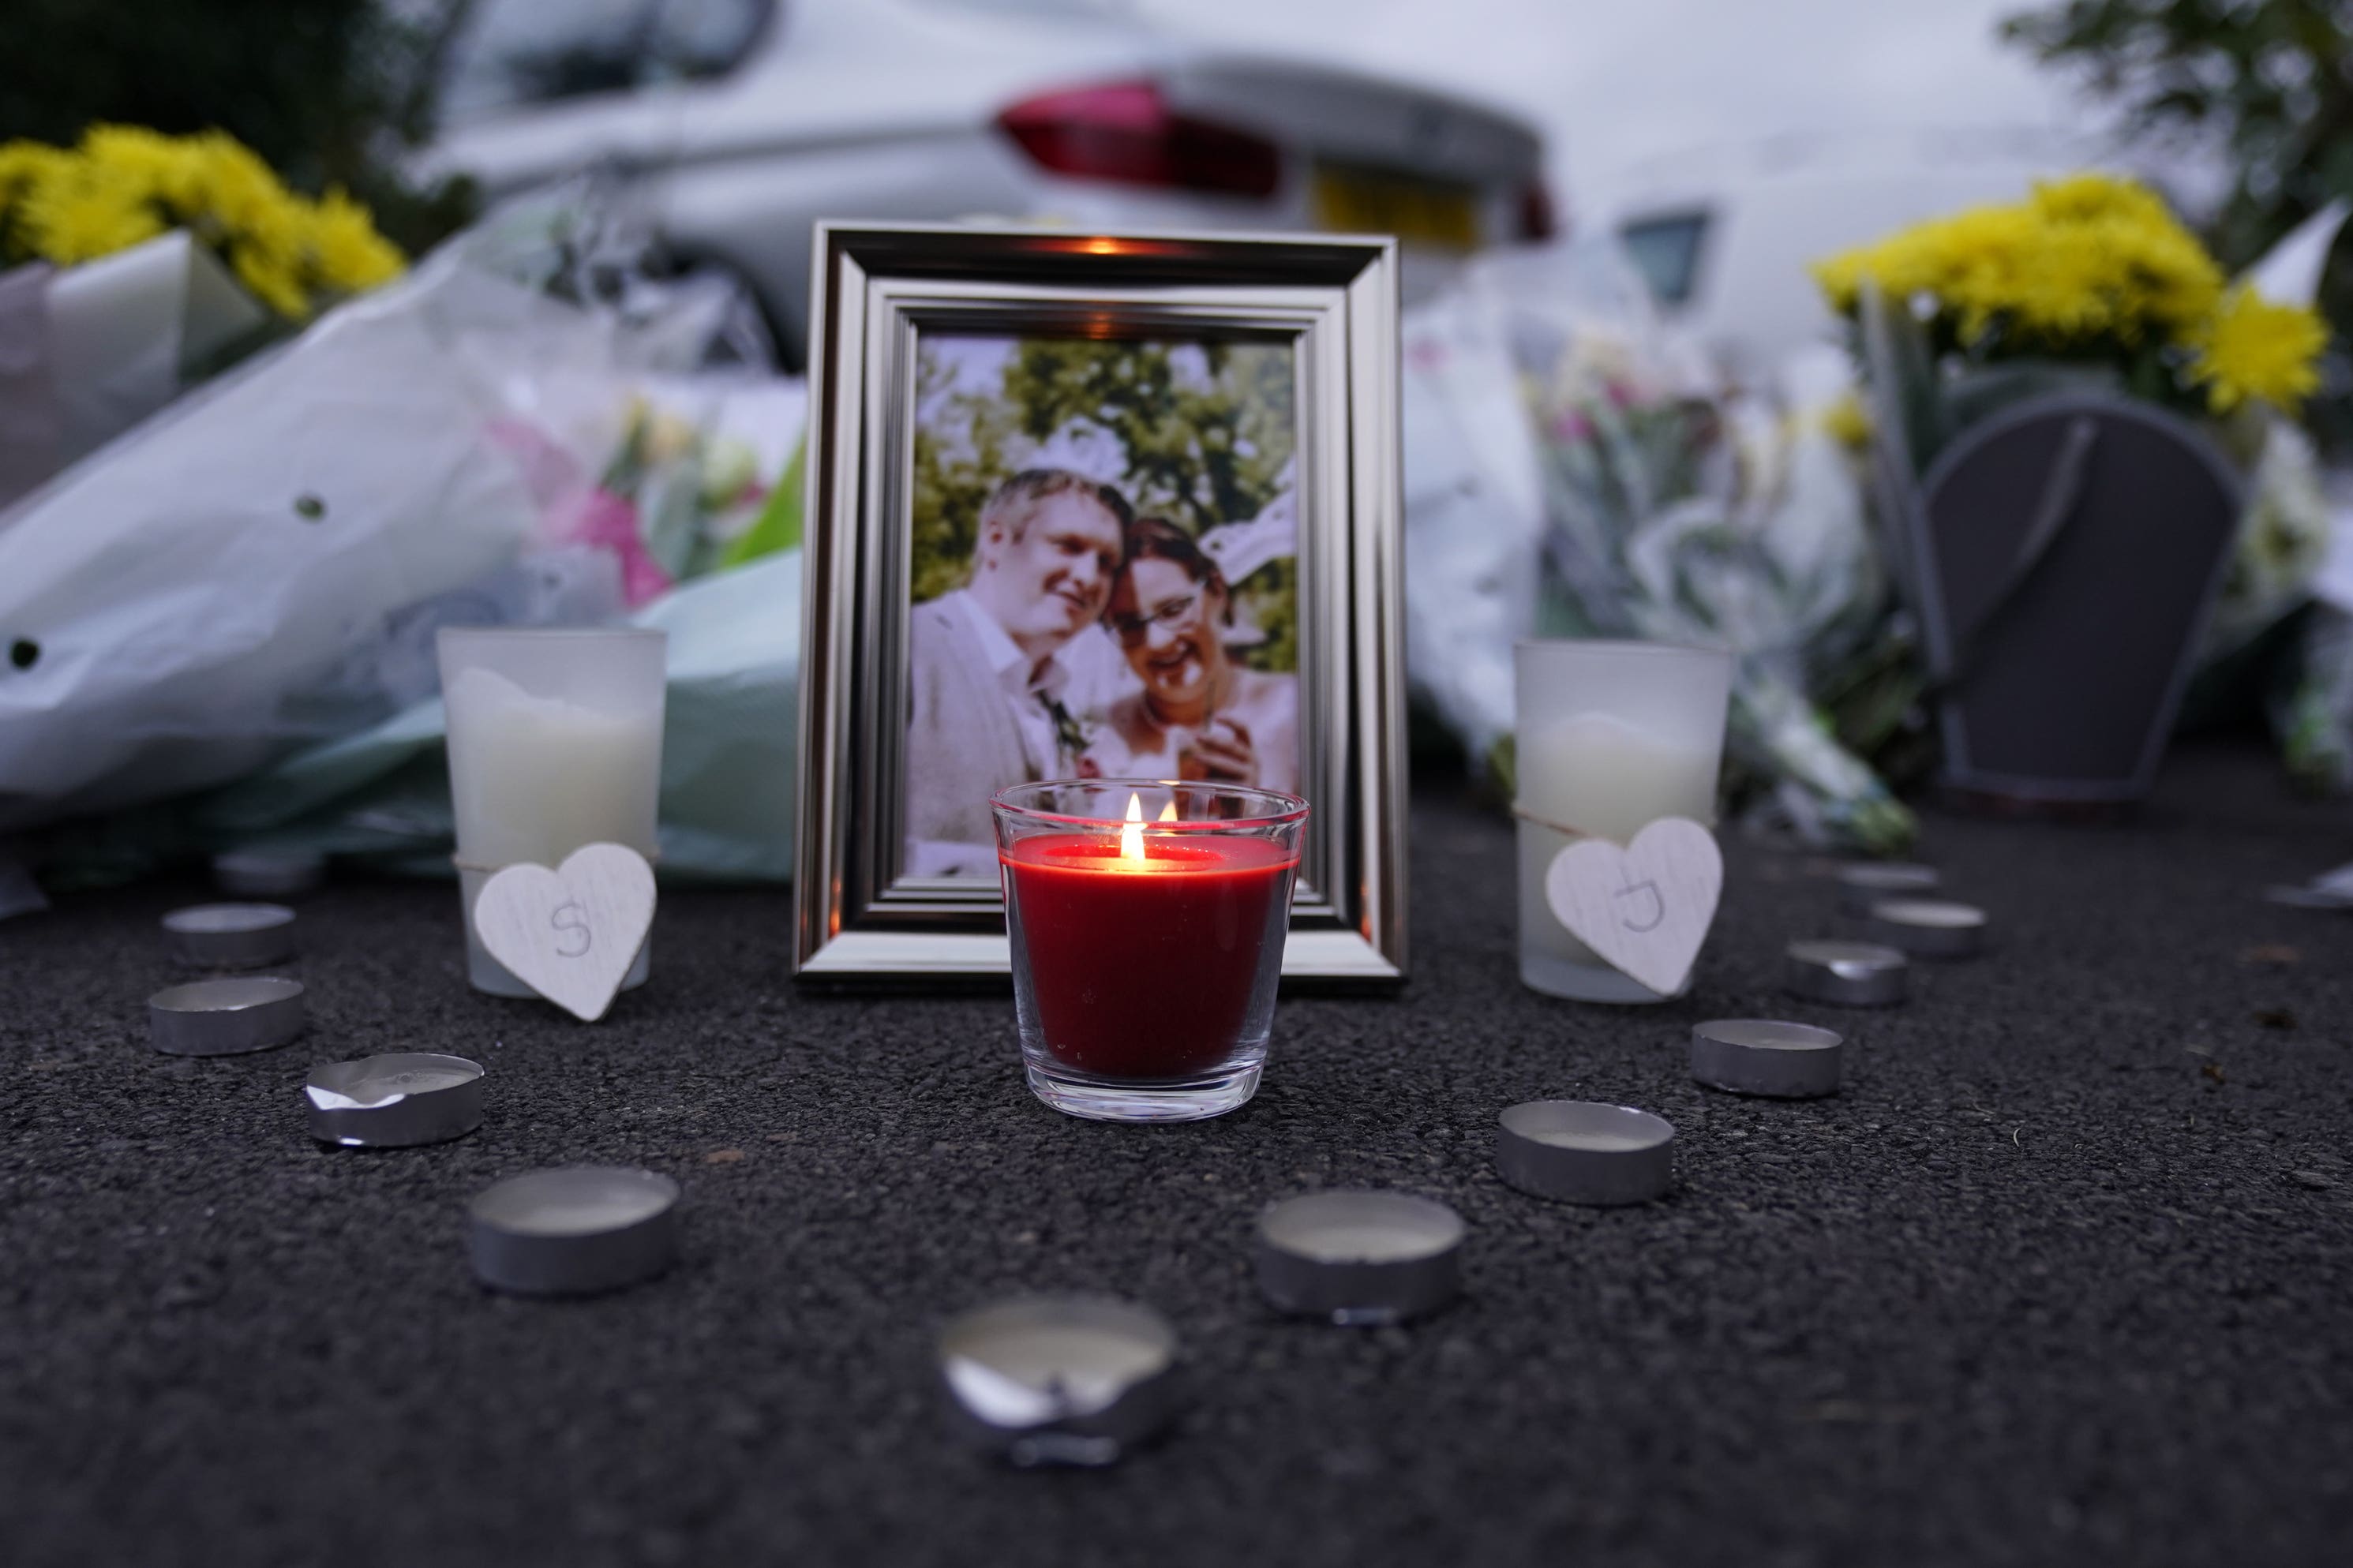 A lit candle and picture frame next to floral tributes left near the scene in Norton Fitzwarren (Andrew Matthews/PA)